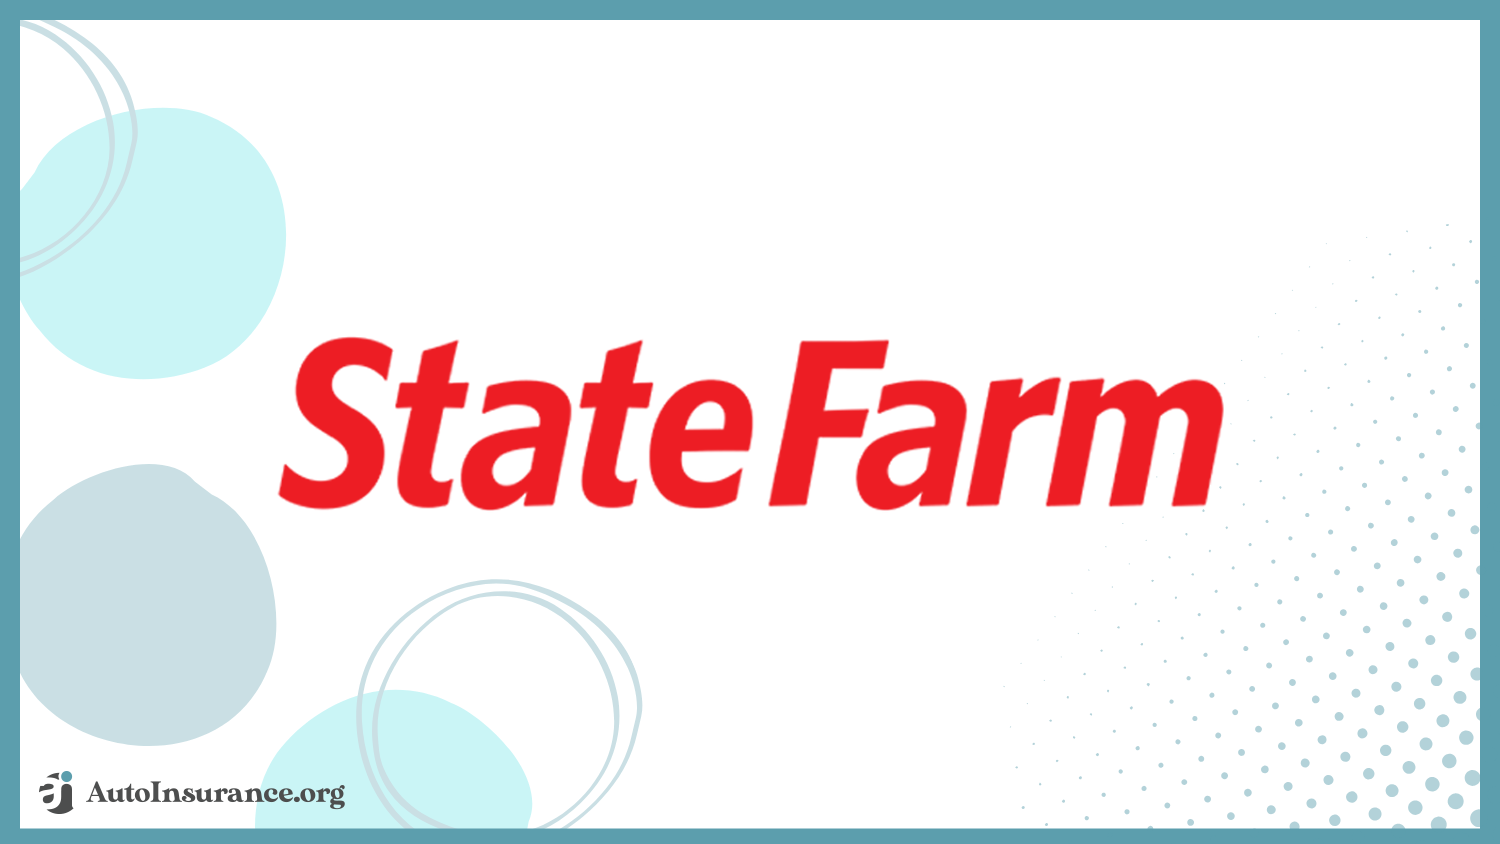 State Farm: Best Auto Insurance Companies for Women